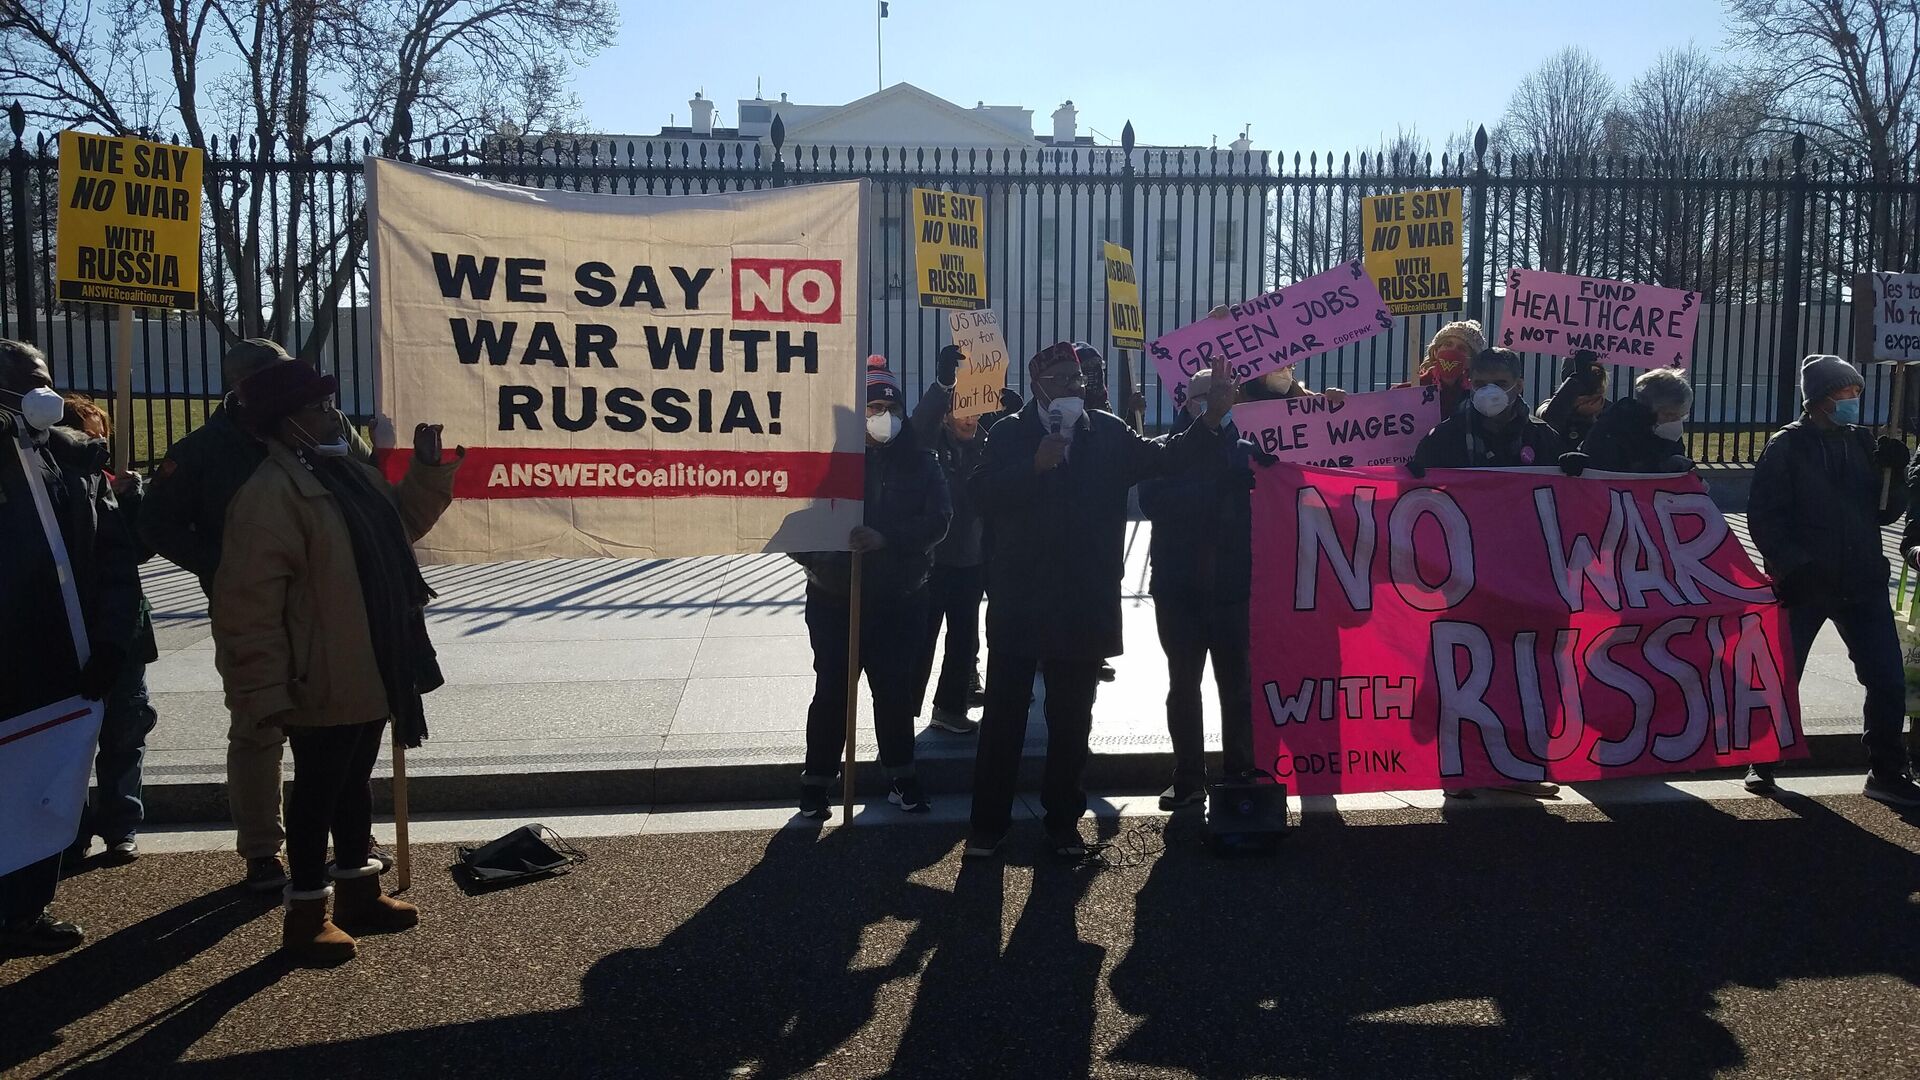 Anti-war groups Code Pink, ANSWER Coalition and Black Alliance for Peace demonstrate outside the White House on January 27, 2022 against a US war with Russia. - Sputnik International, 1920, 27.01.2022